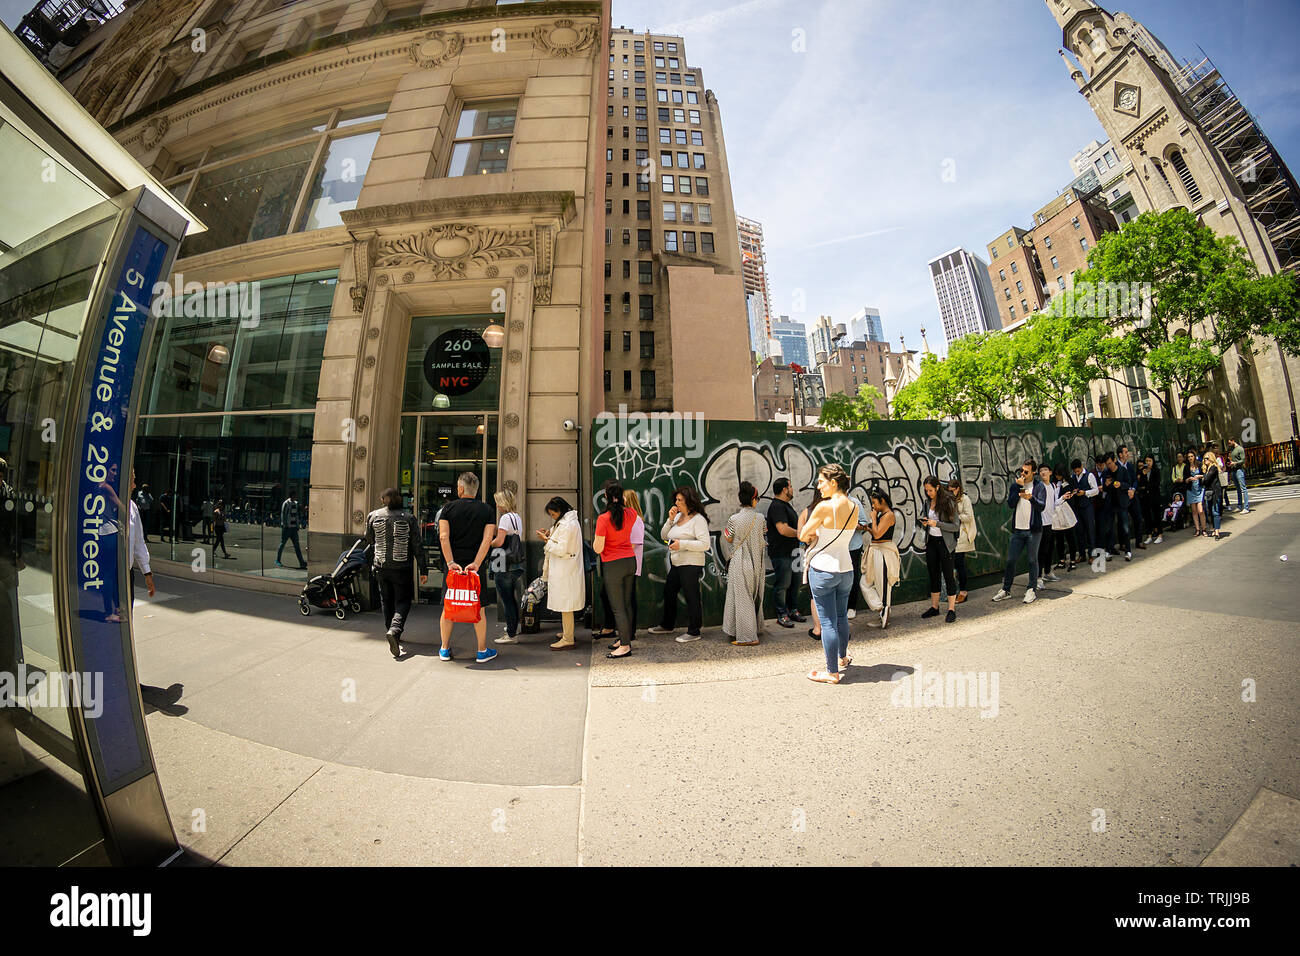 Shoppers outside the Montblanc sample sale in the NoMad neighborhood of New York on Tuesday, June 4, 2019. (© Richard B. Levine) Stock Photo